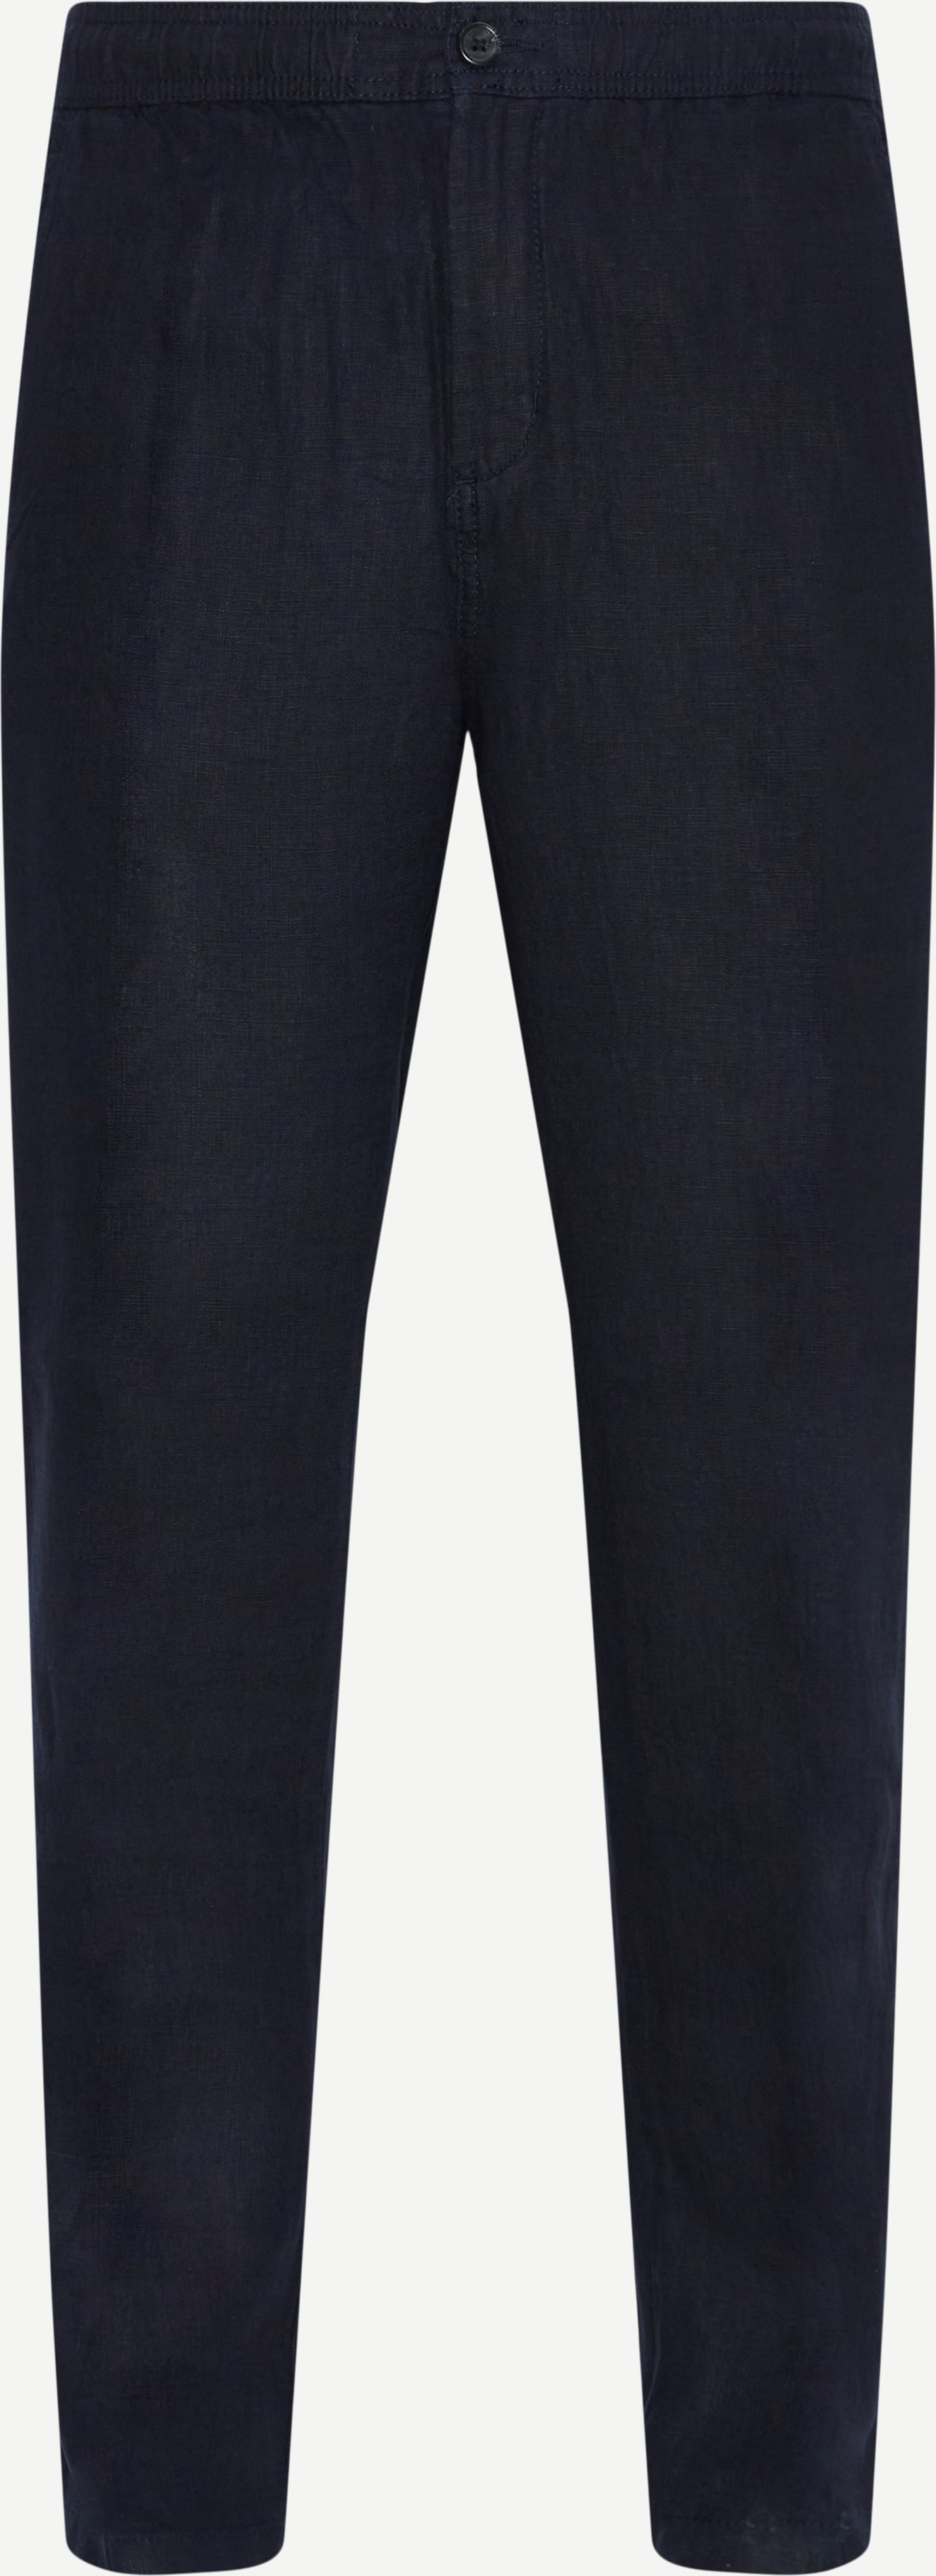 ICELAND Trousers BANDERAS Blue